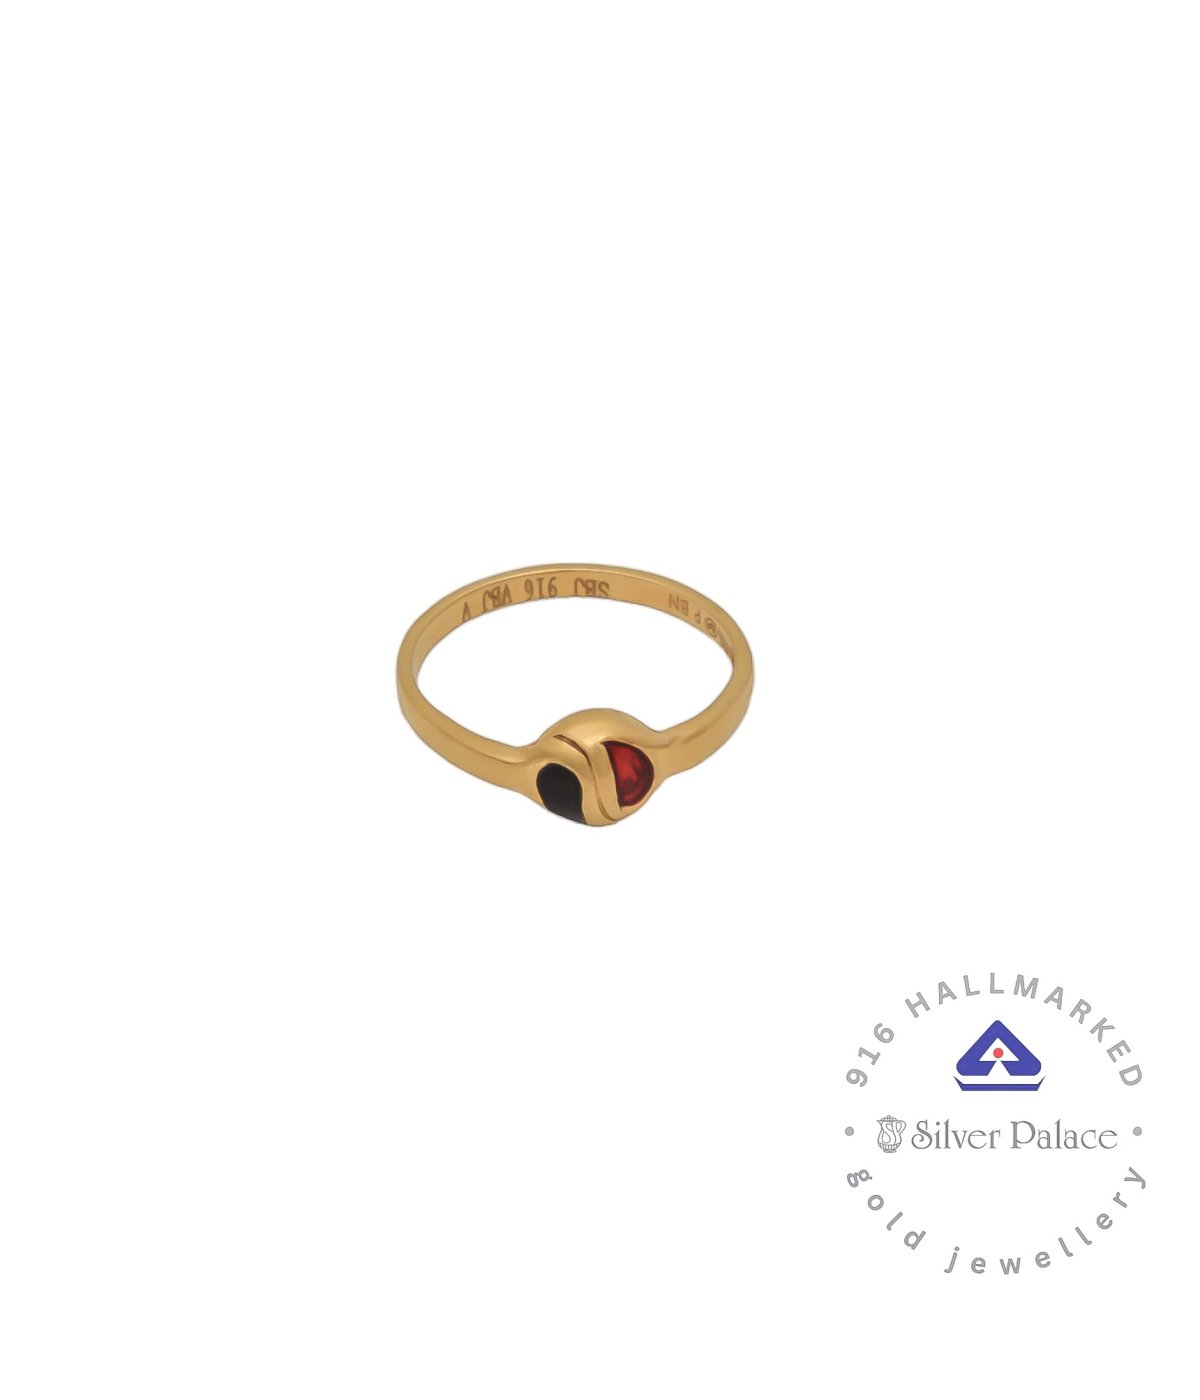 Kanche Collections New Design With Enamel Finish 916 Gold Ring For New Born Baby's